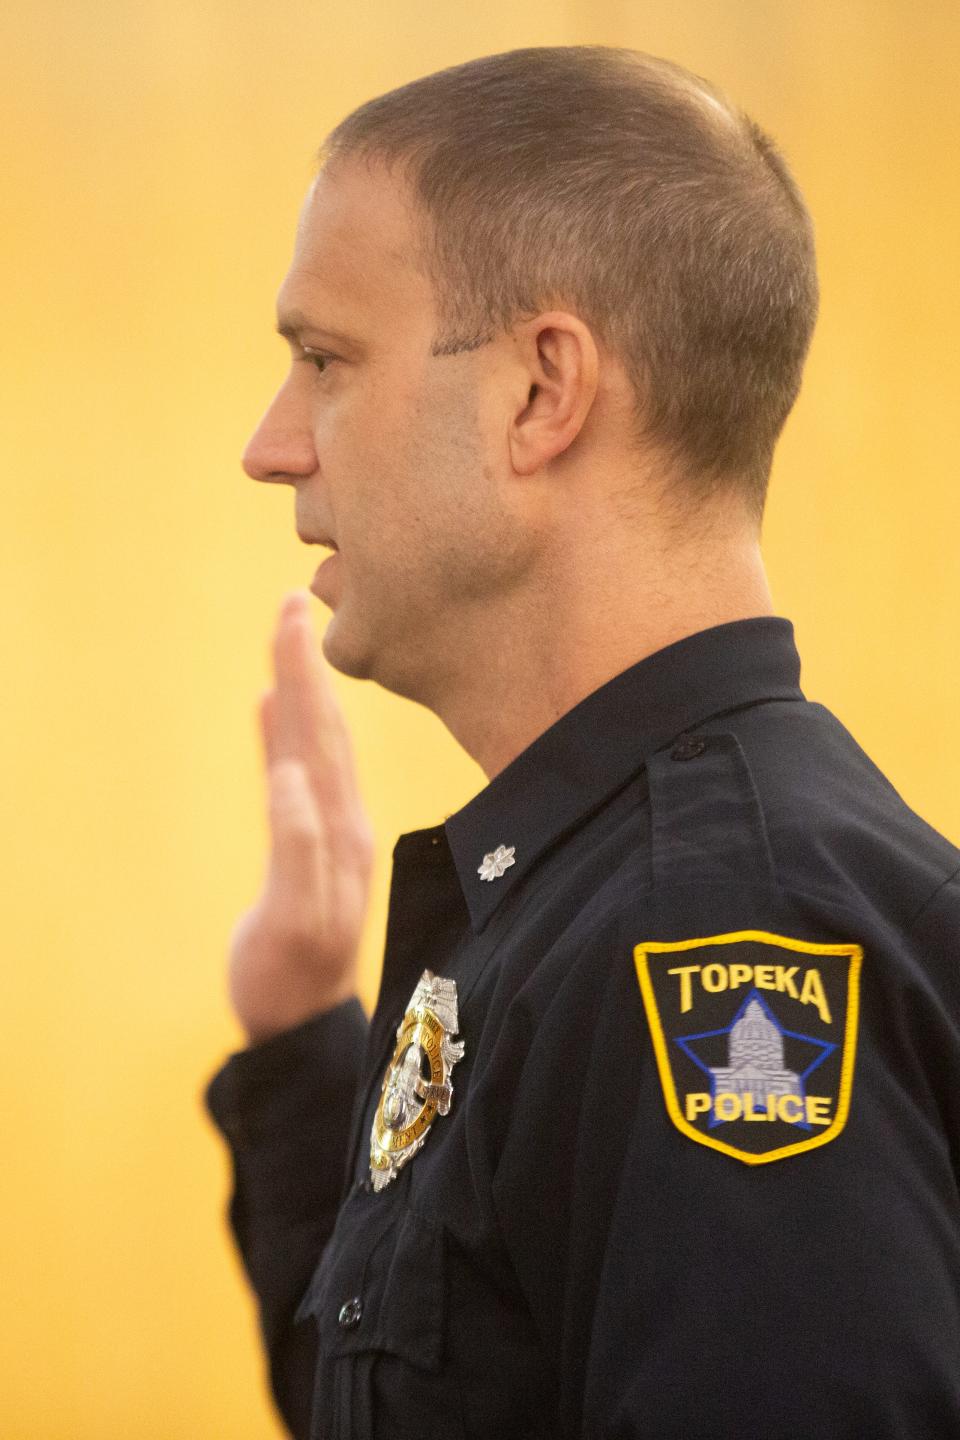 Topeka Deputy Police Chief Jamey Haltom takes an oath during Tuesday's trial.